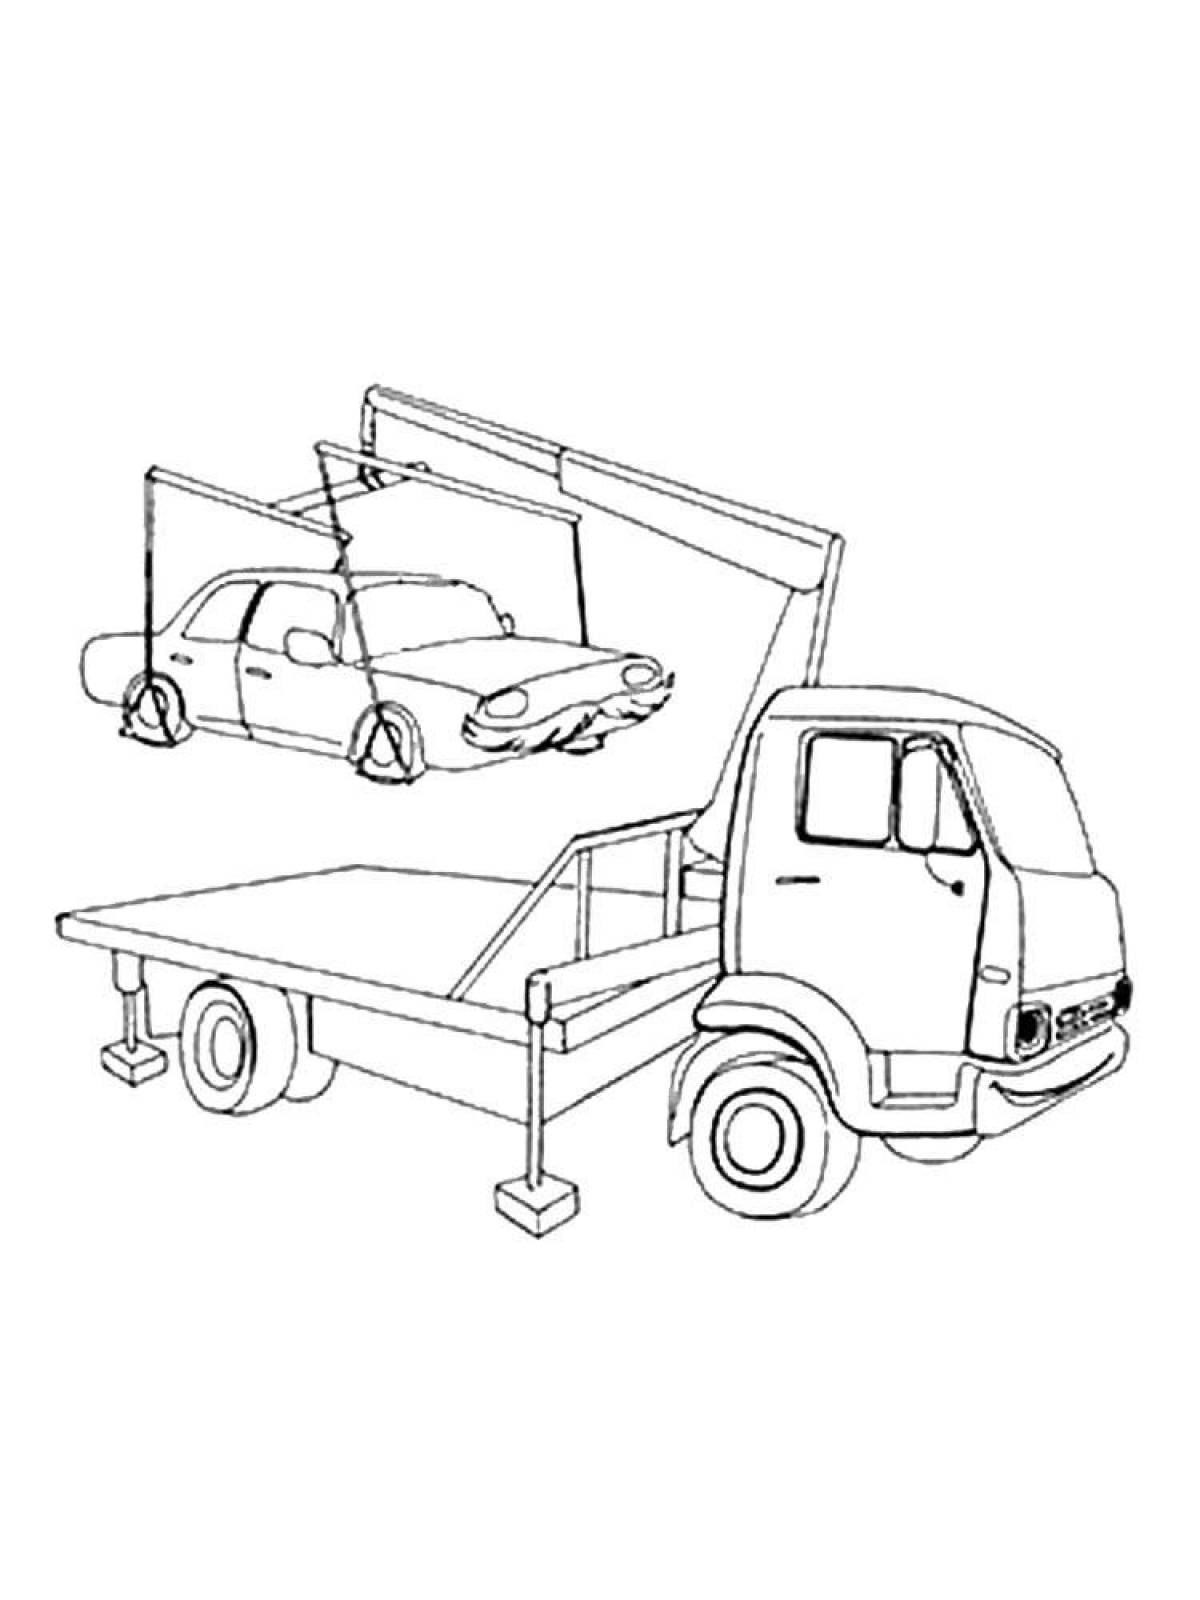 Coloring complex tow truck